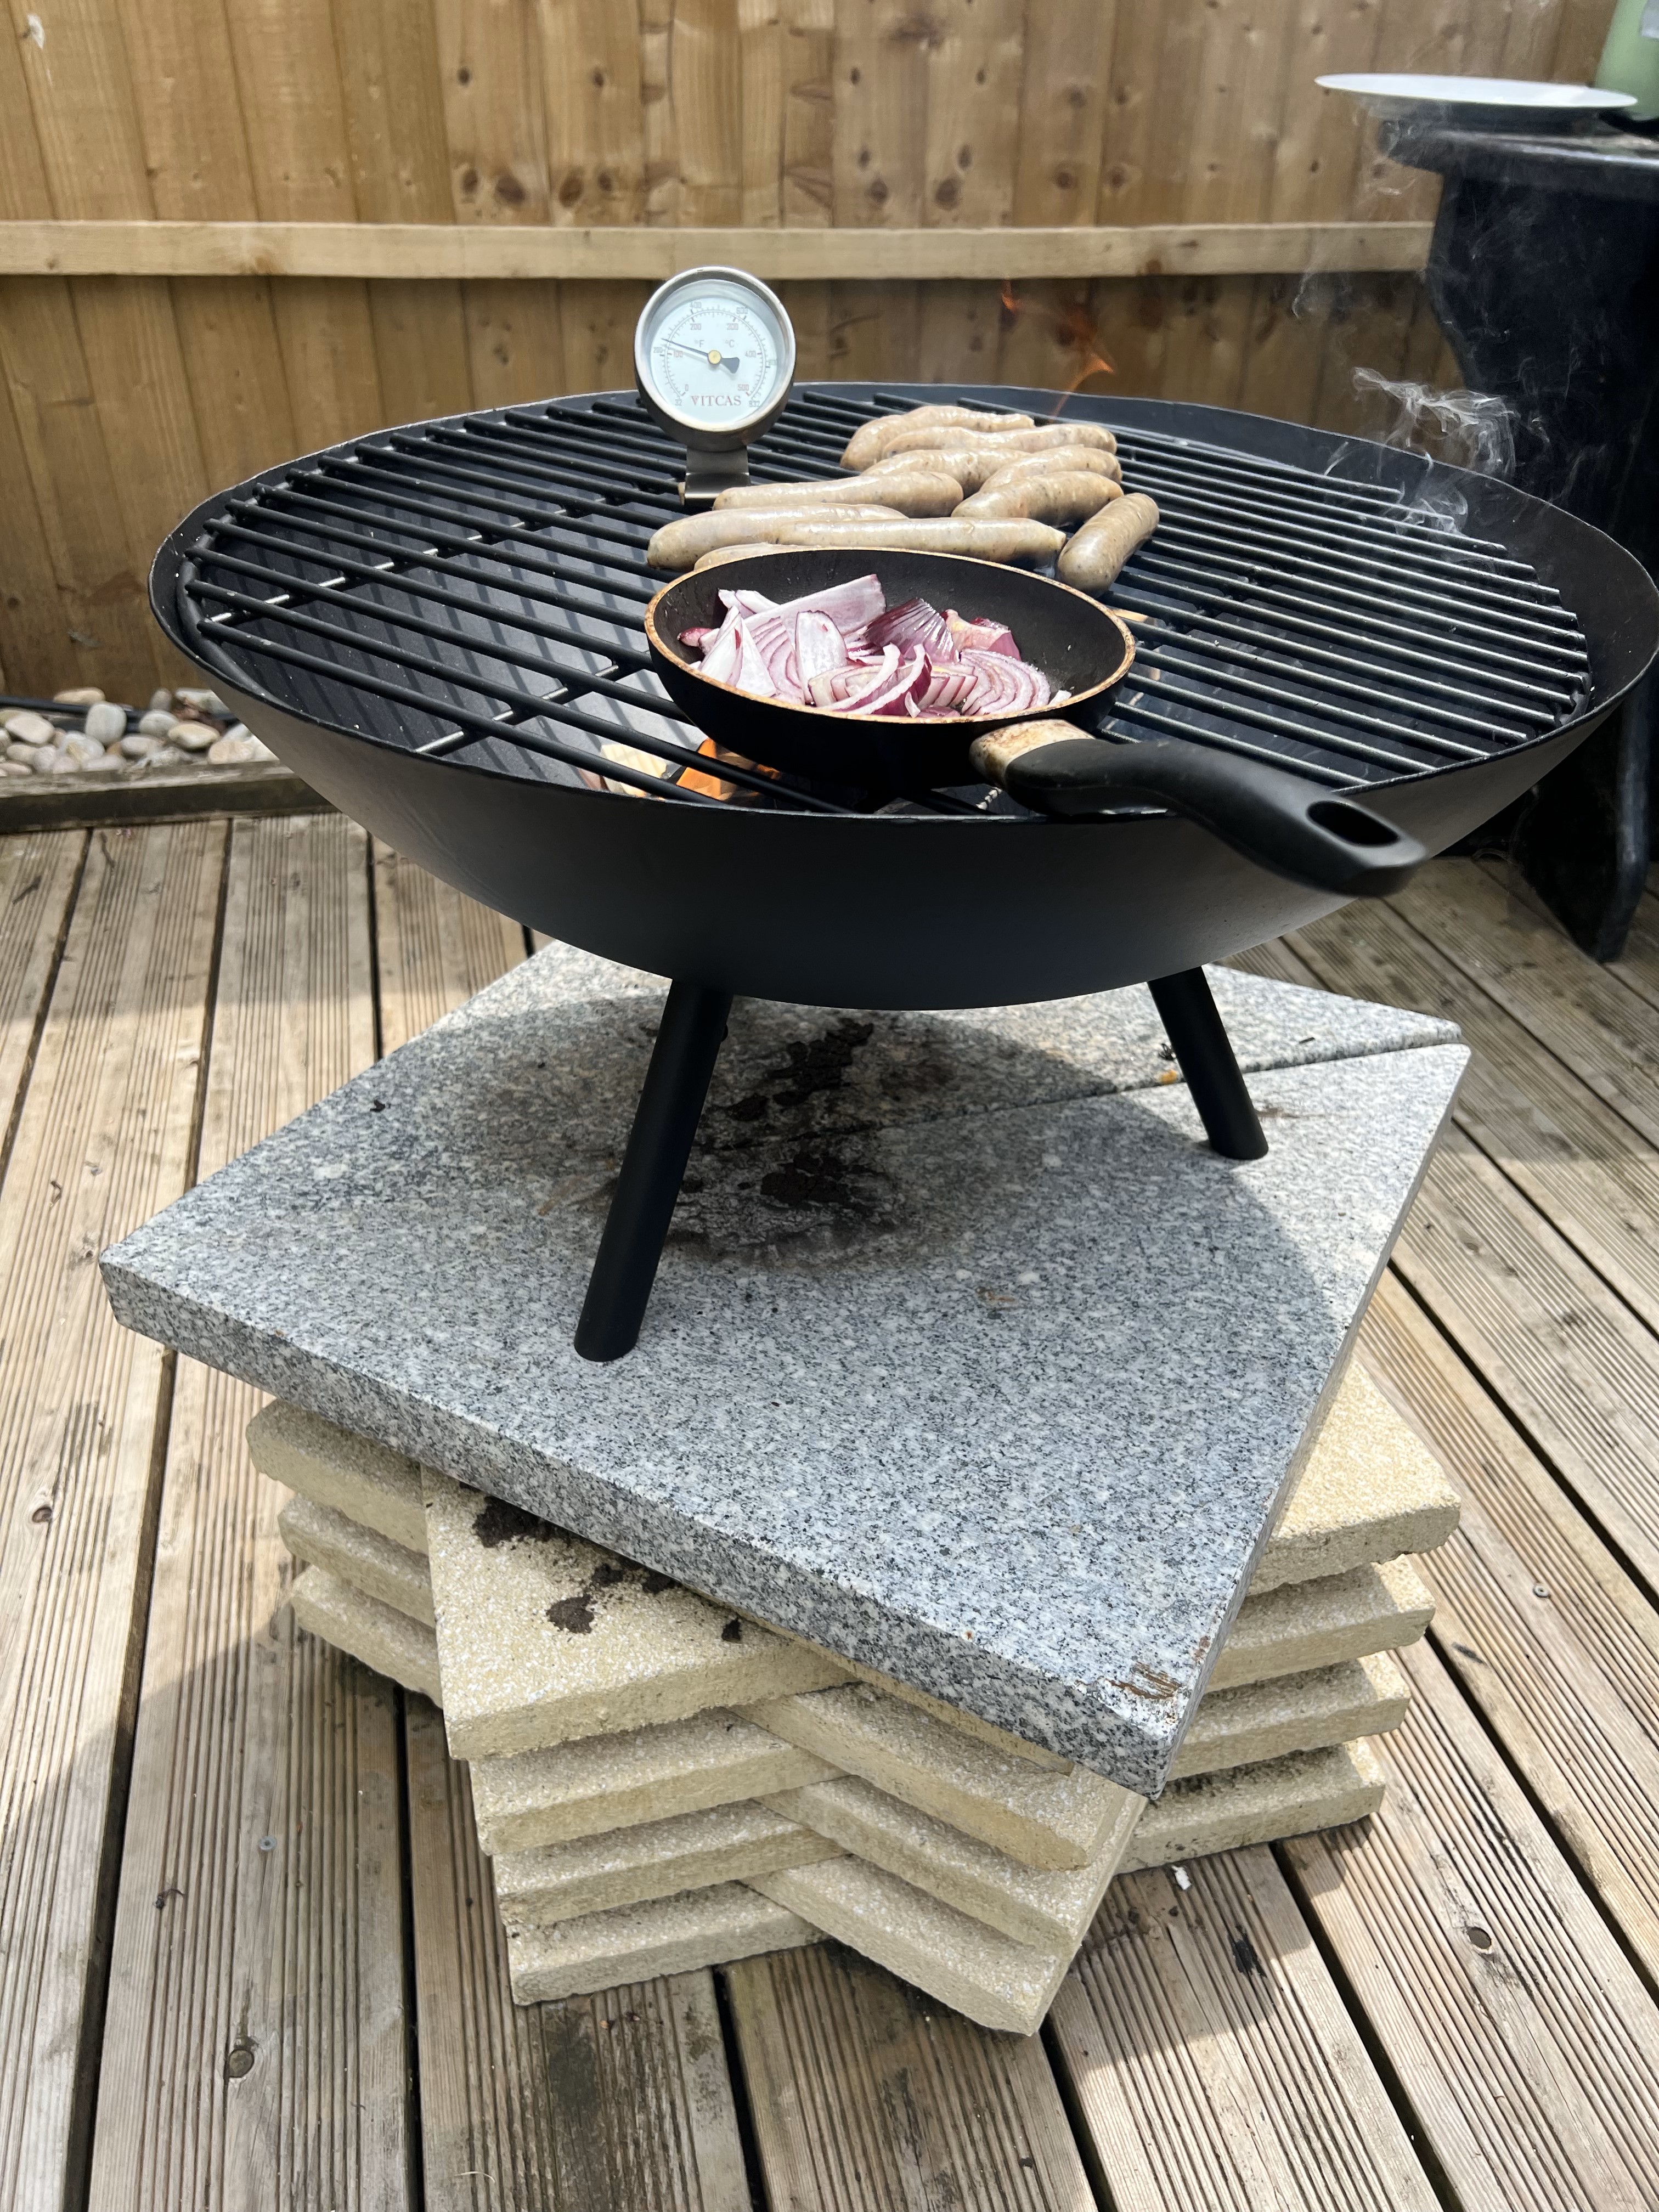 Fire Bowl and Grill Kit